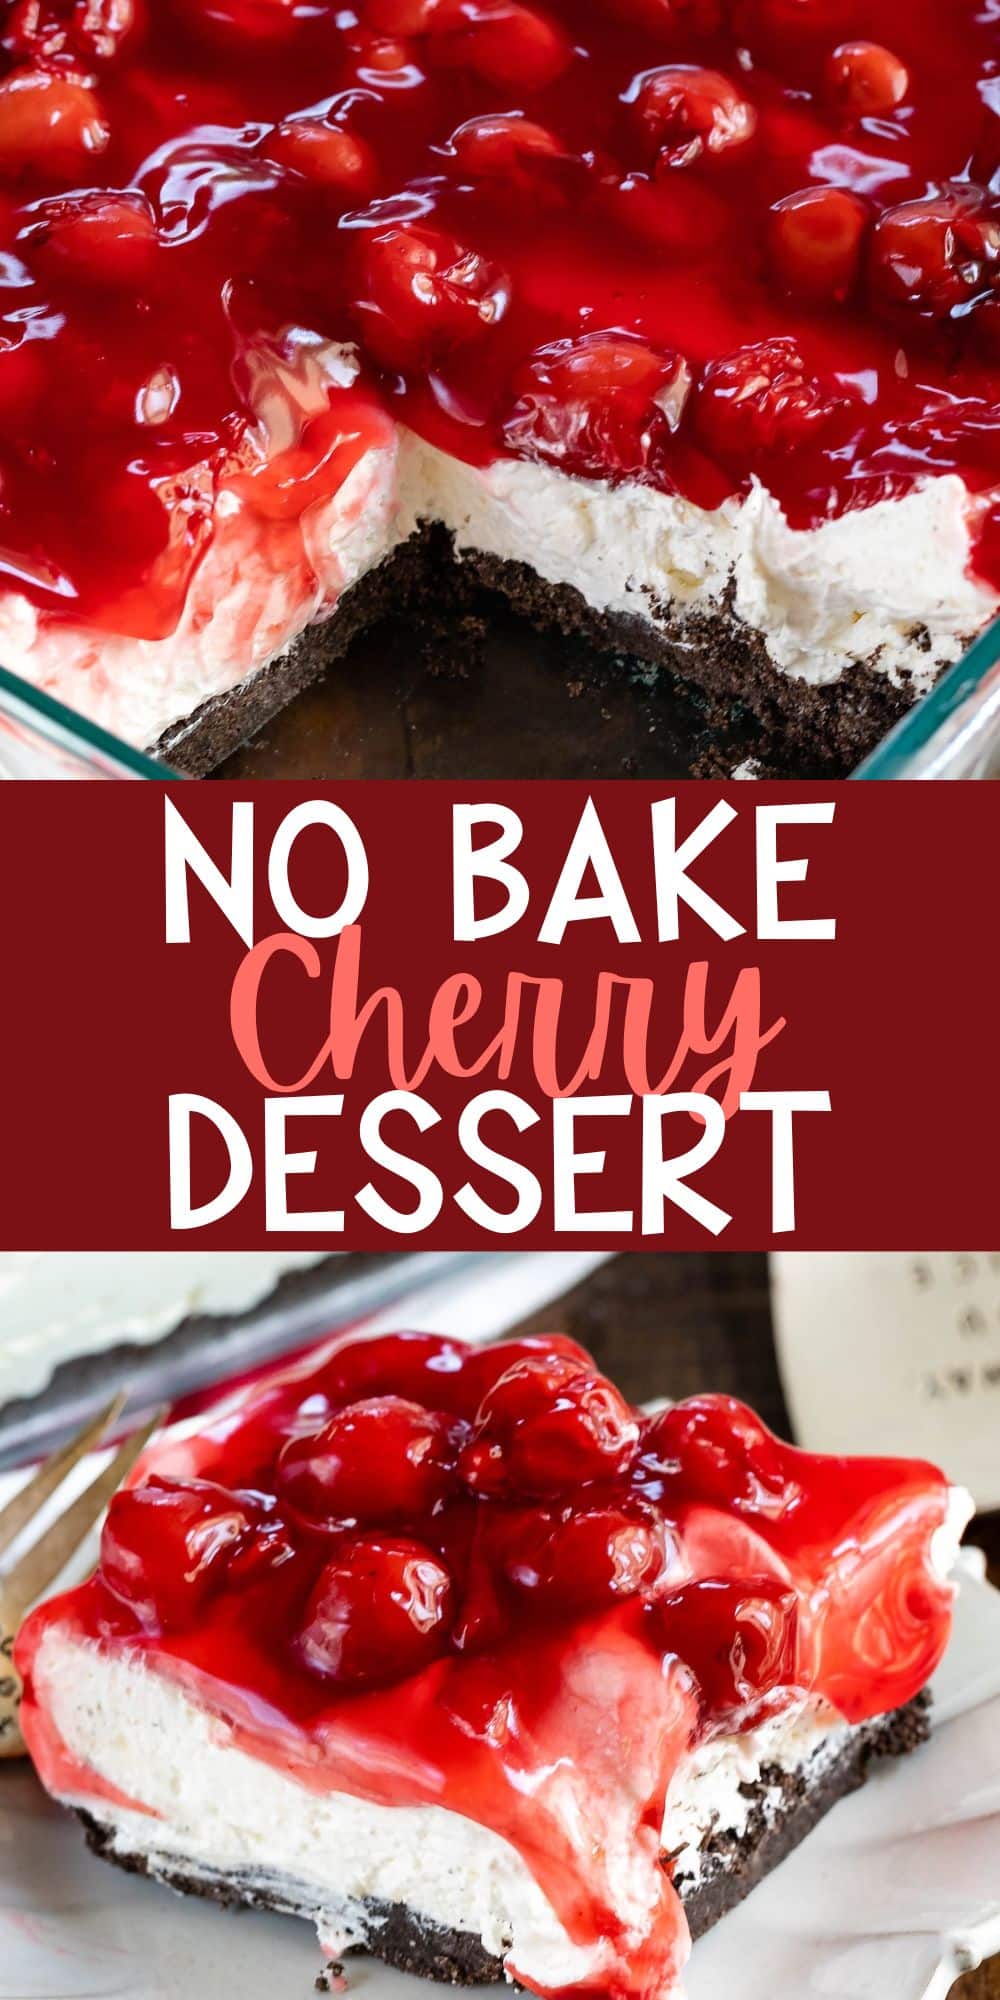 two photos of layered dessert topped with cherries with words on the image.